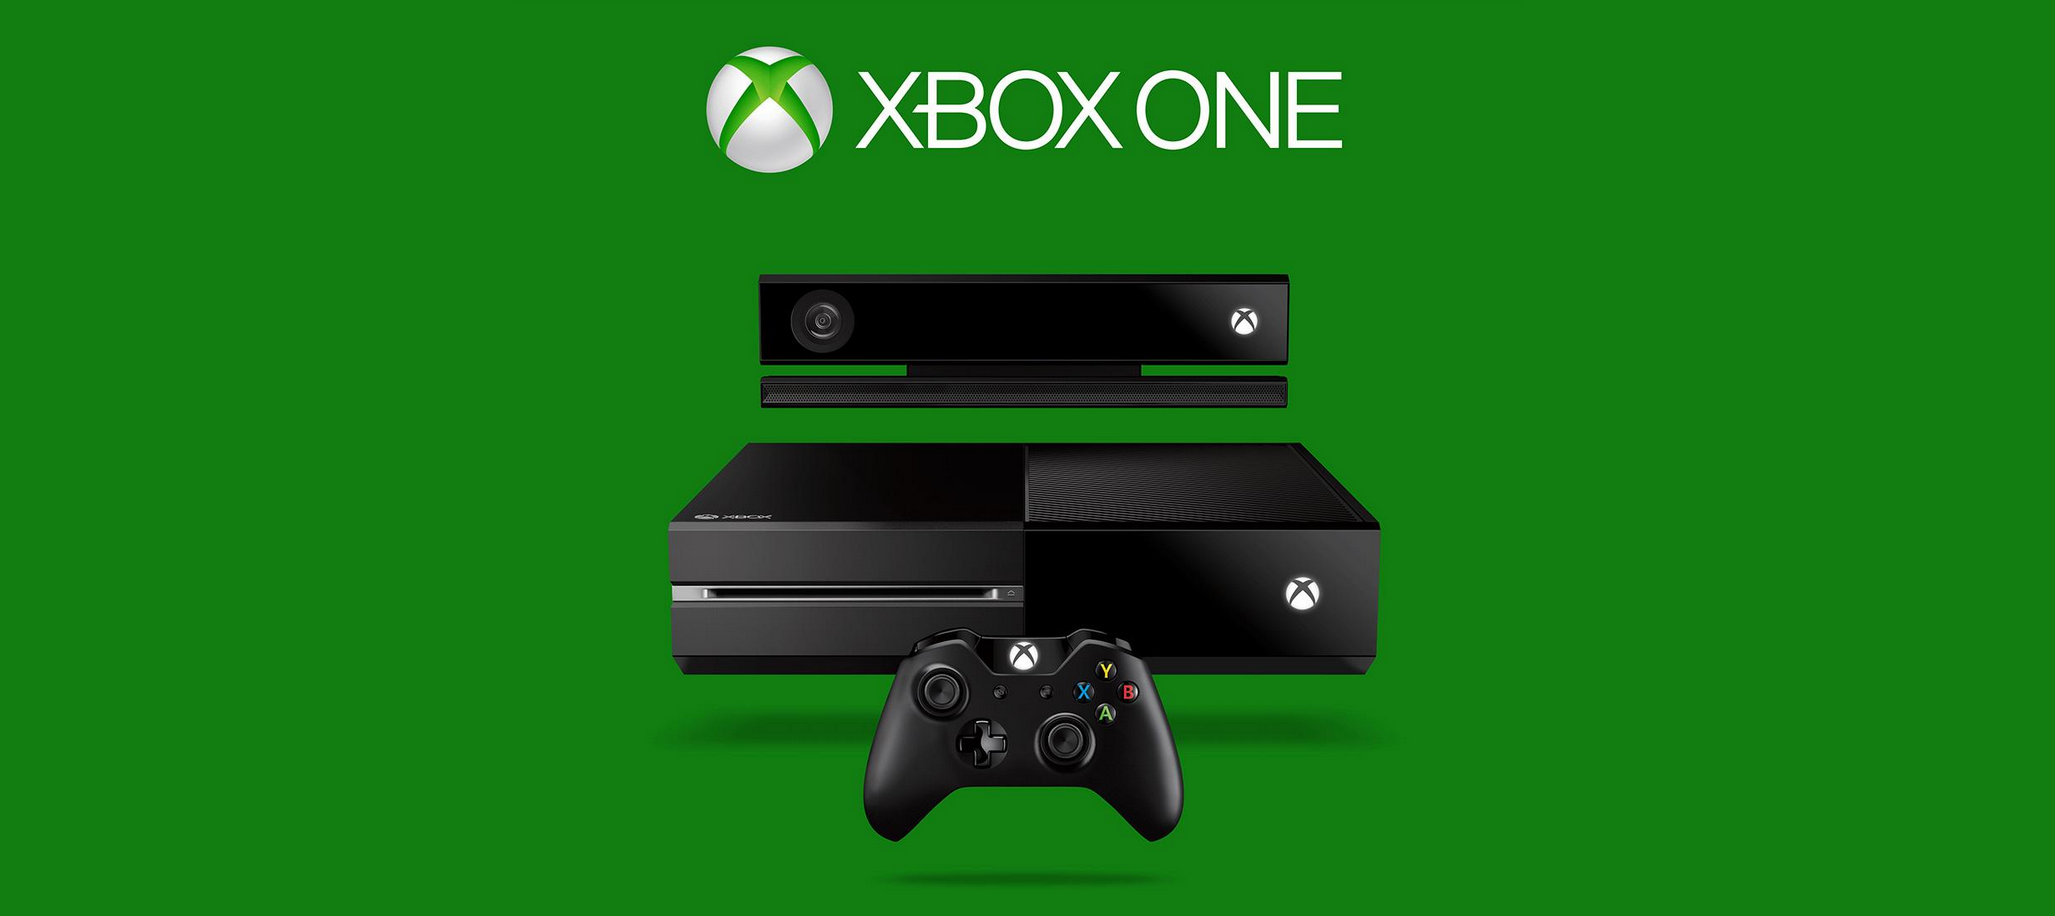 Xbox One, an All-in-One Entertainment System